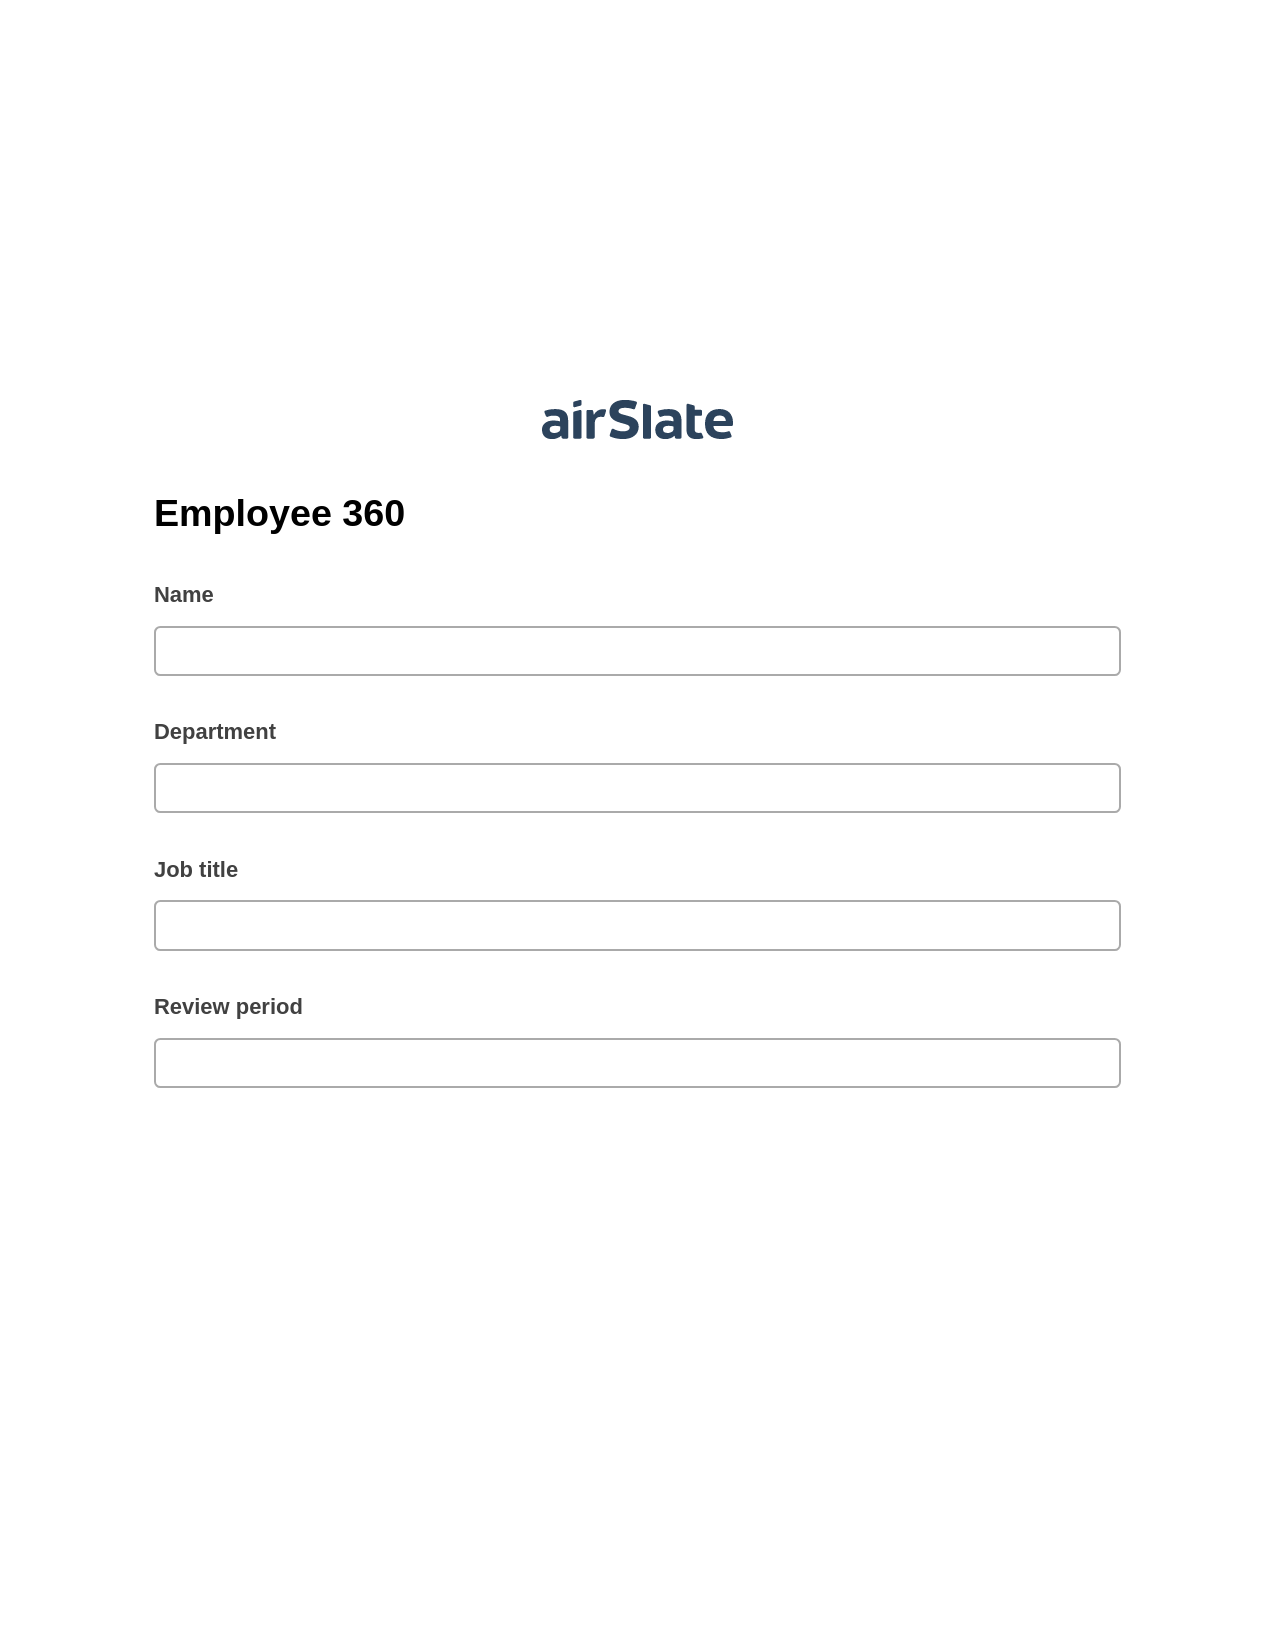 Employee 360 Pre-fill from AirTable Bot, Custom Field's Value Bot, Export to Smartsheet